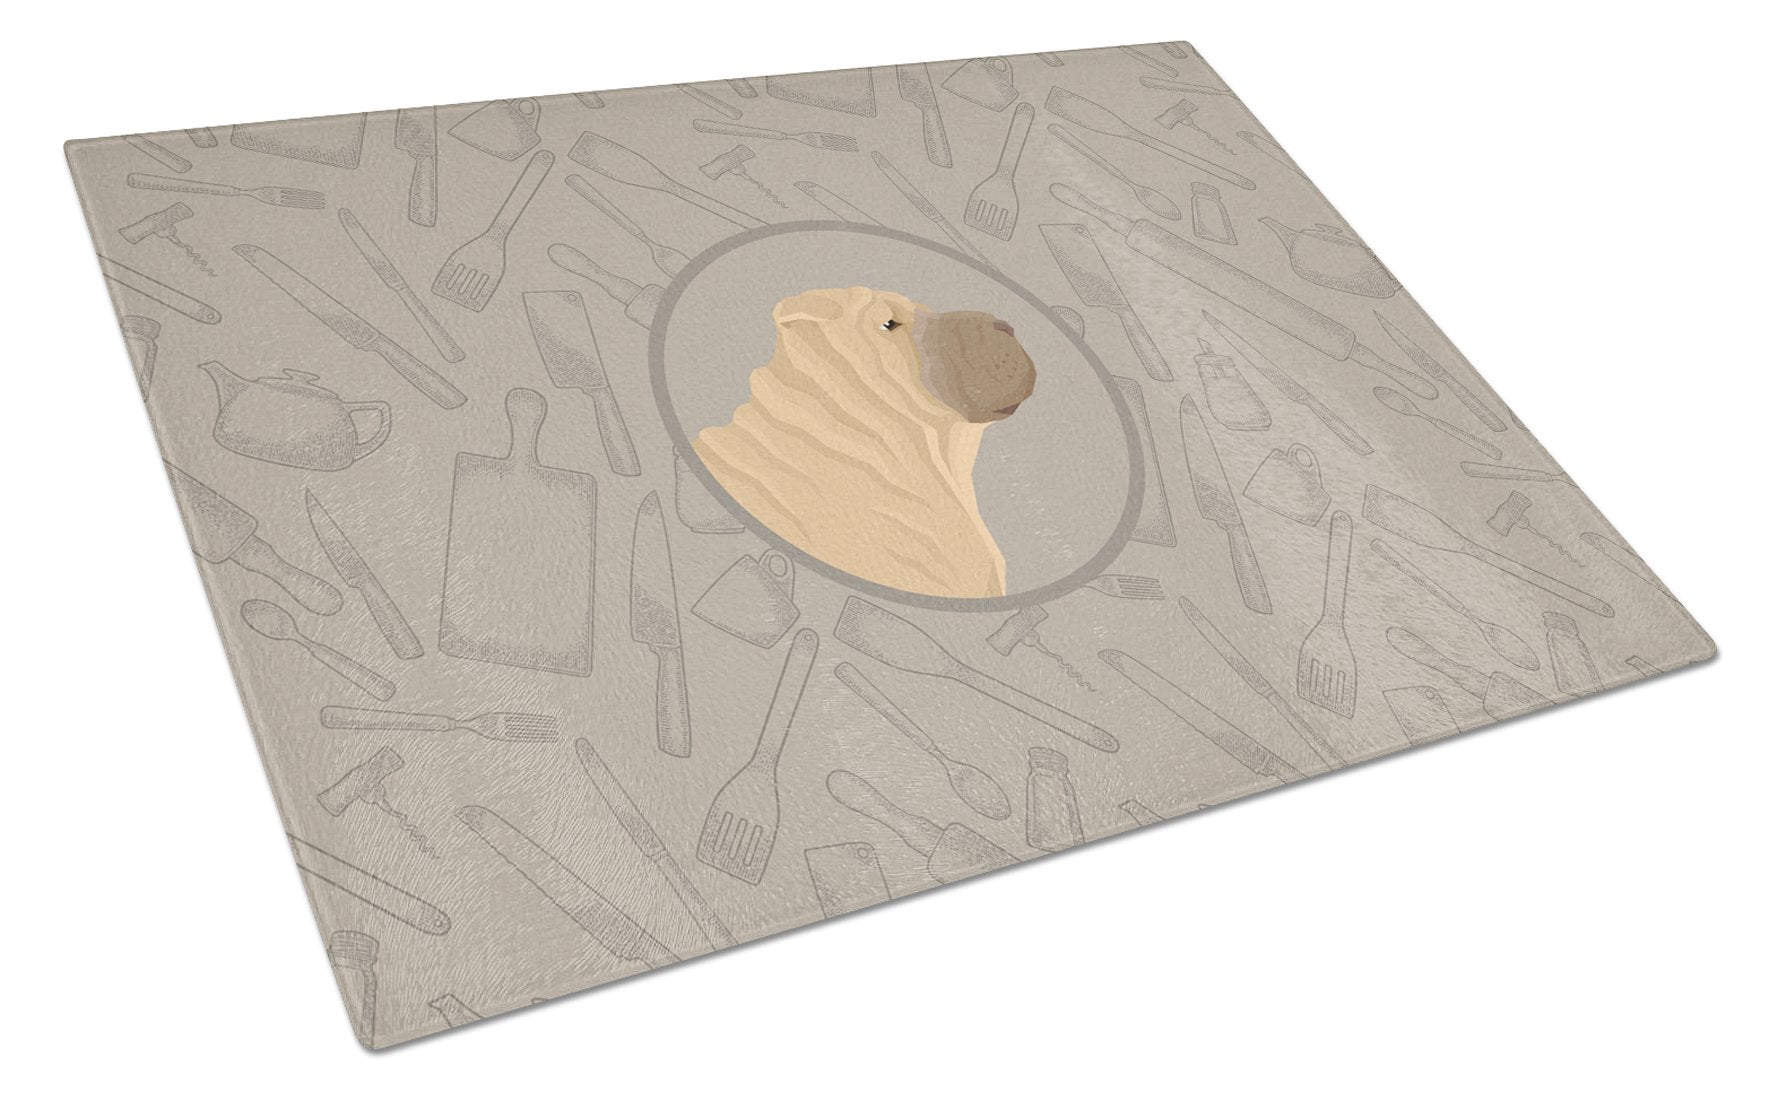 Shar Pei In the Kitchen Glass Cutting Board Large CK2209LCB by Caroline's Treasures